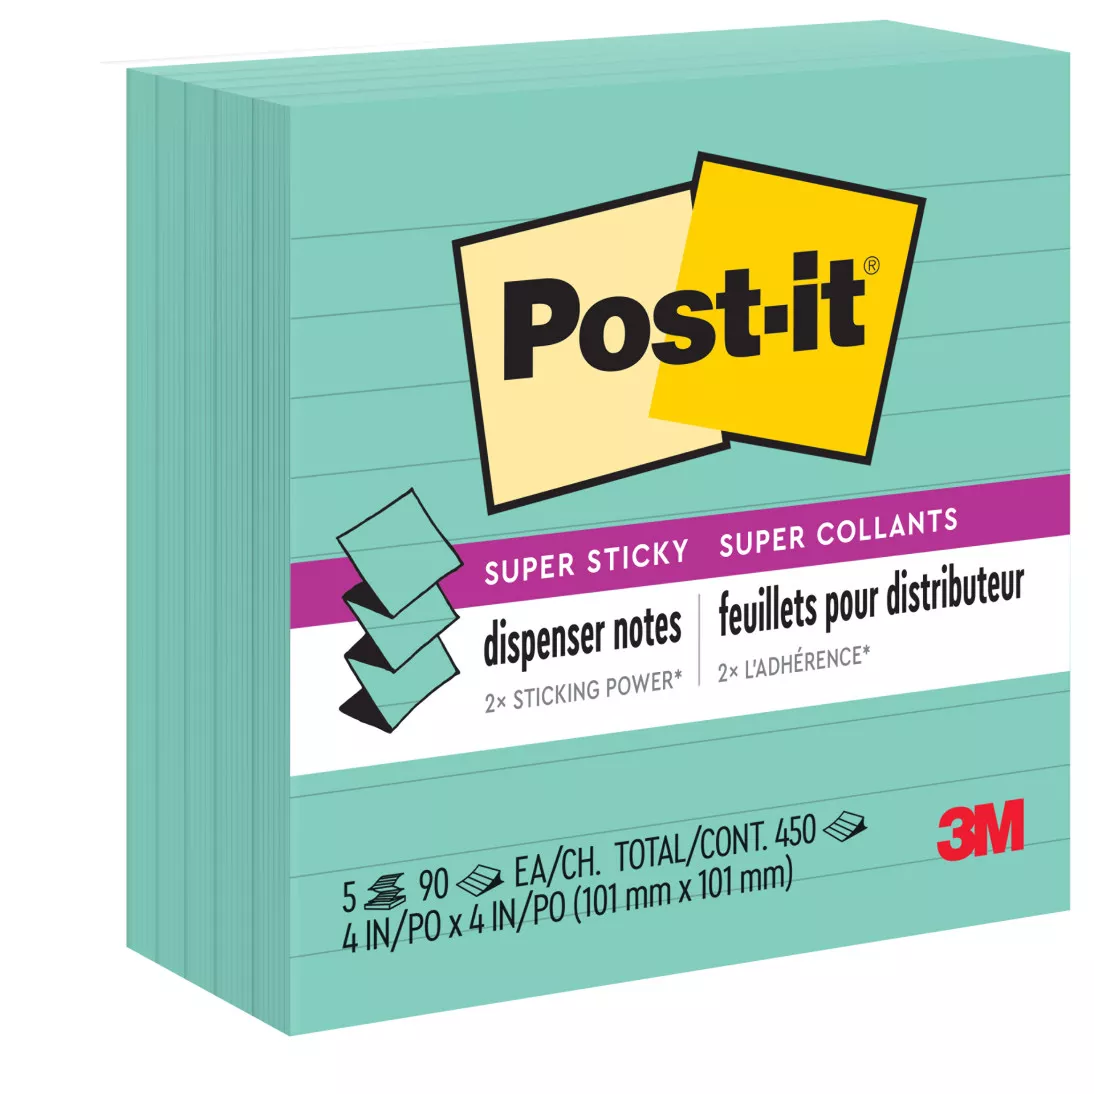 Post-it® Super Sticky Pop-up Notes R440-WASS, 4 in x 4 in (101 mm x 101 mm)